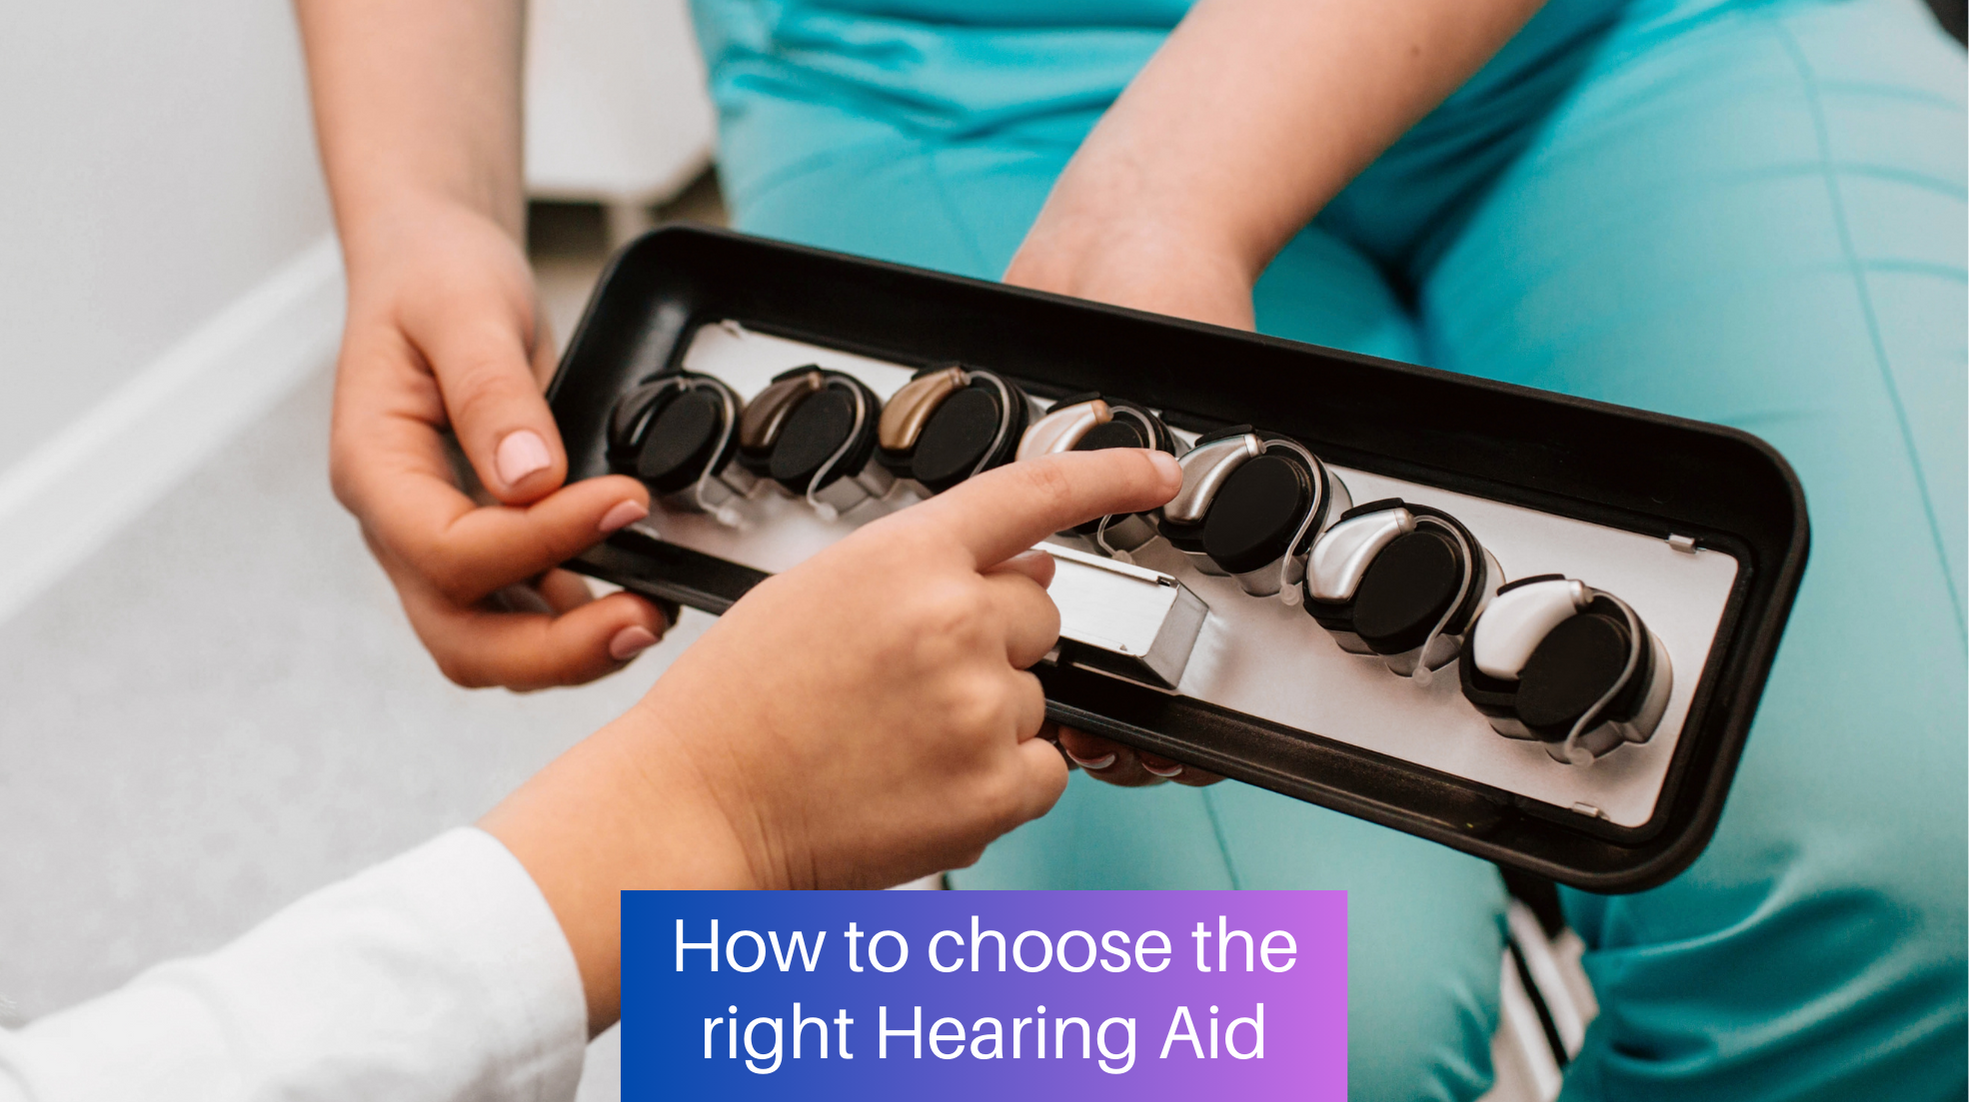 How to choose the right hearing aid for me?